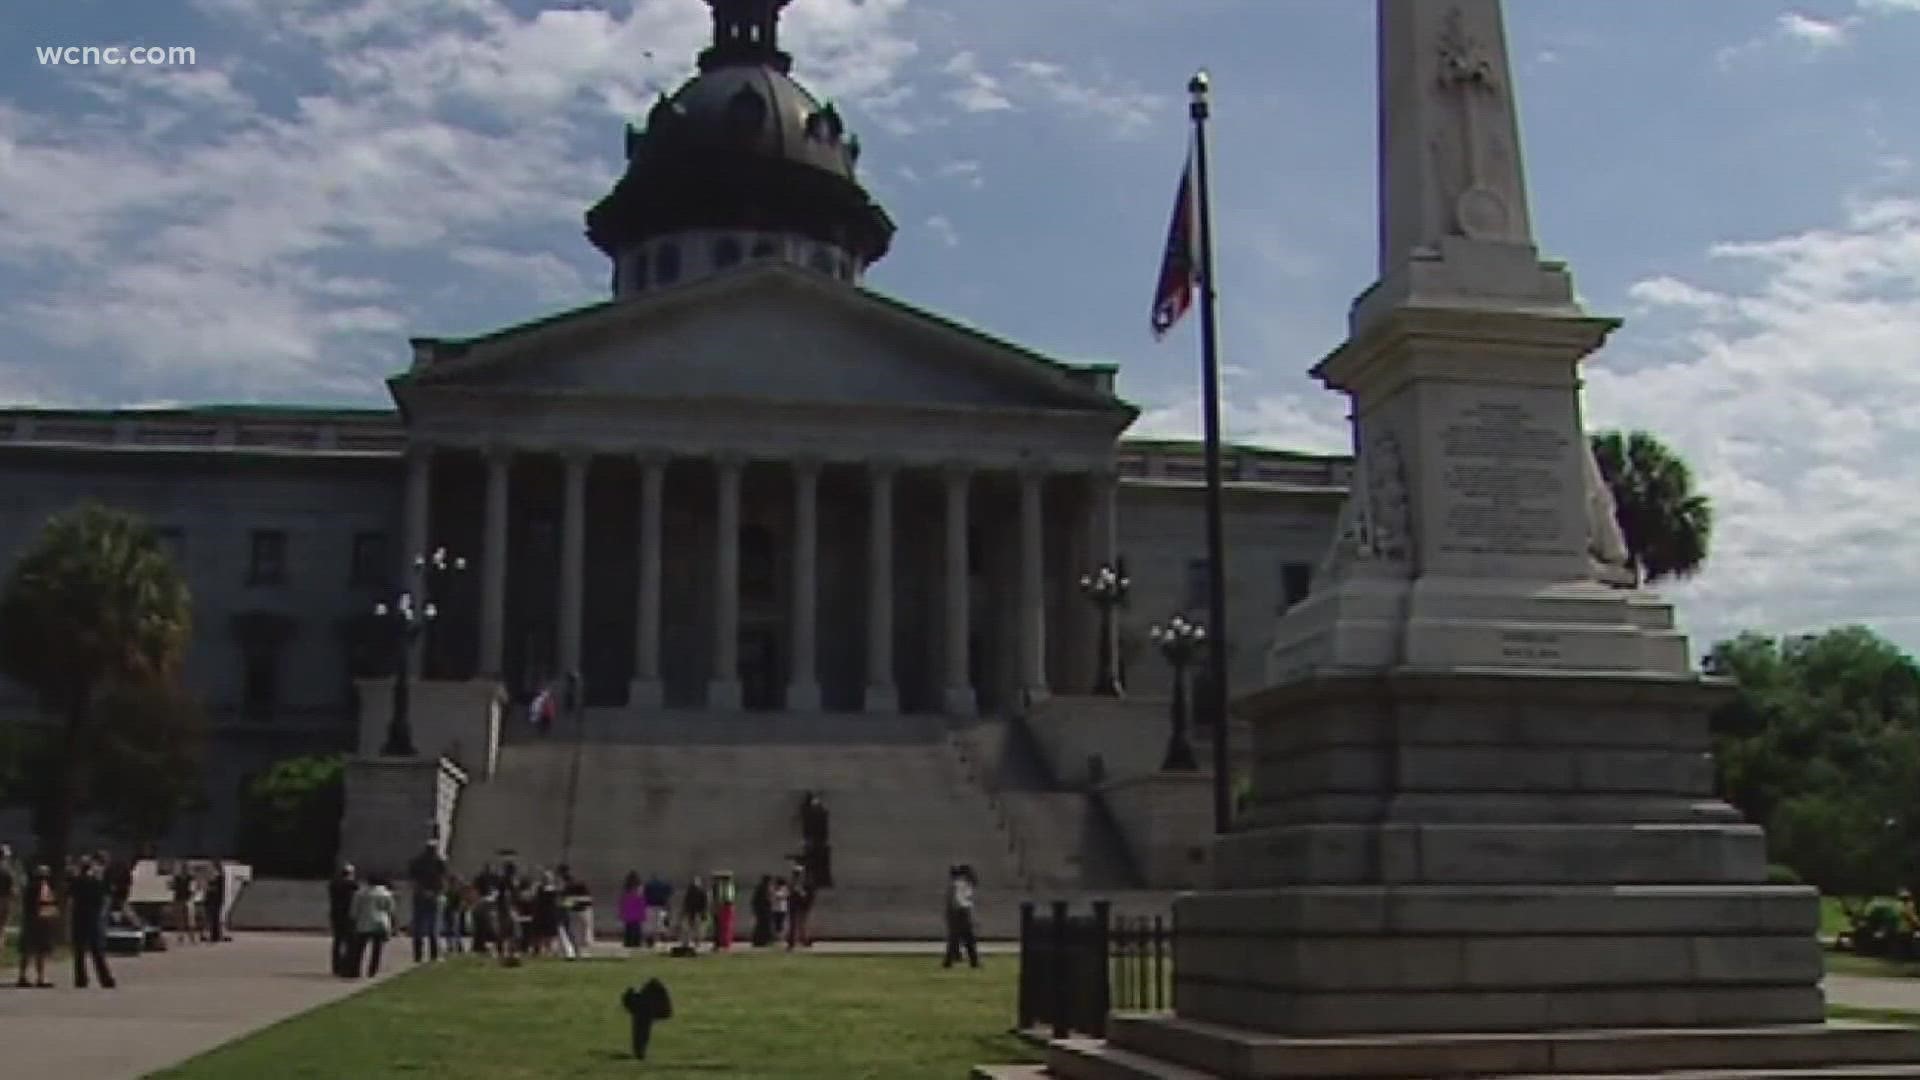 A Senate committee voted state employees can take time off if they wish on Juneteenth.